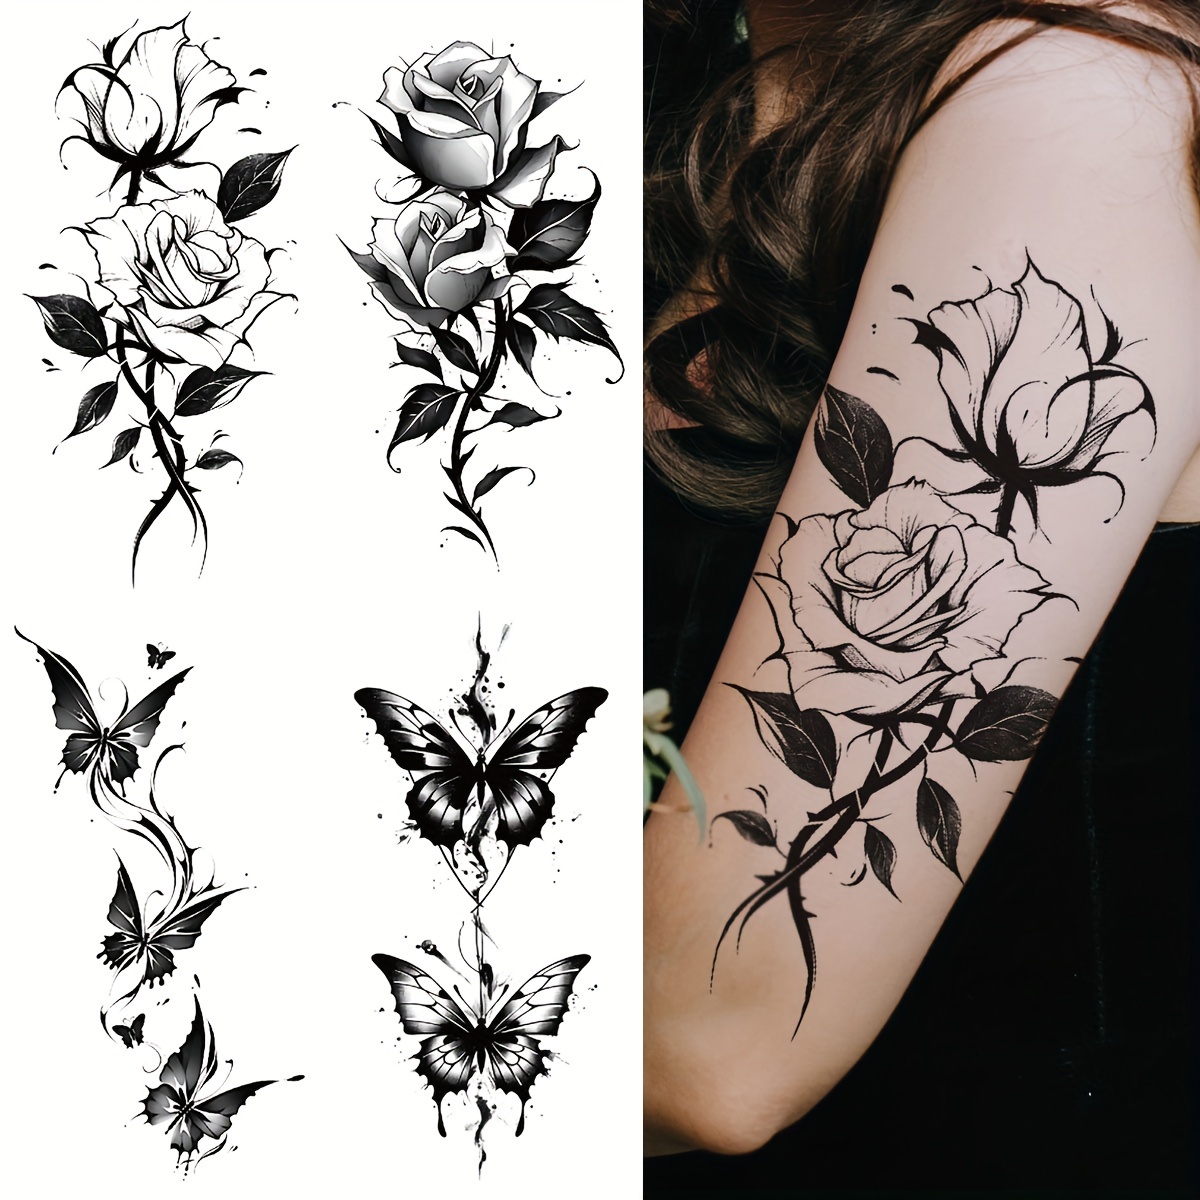 

4 Sheets Waterproof Floral Temporary Tattoo Stickers, Black Rose Flower Butterfly Design For Women Arm Thigh Long Lasting And Easy To Stick And Remove